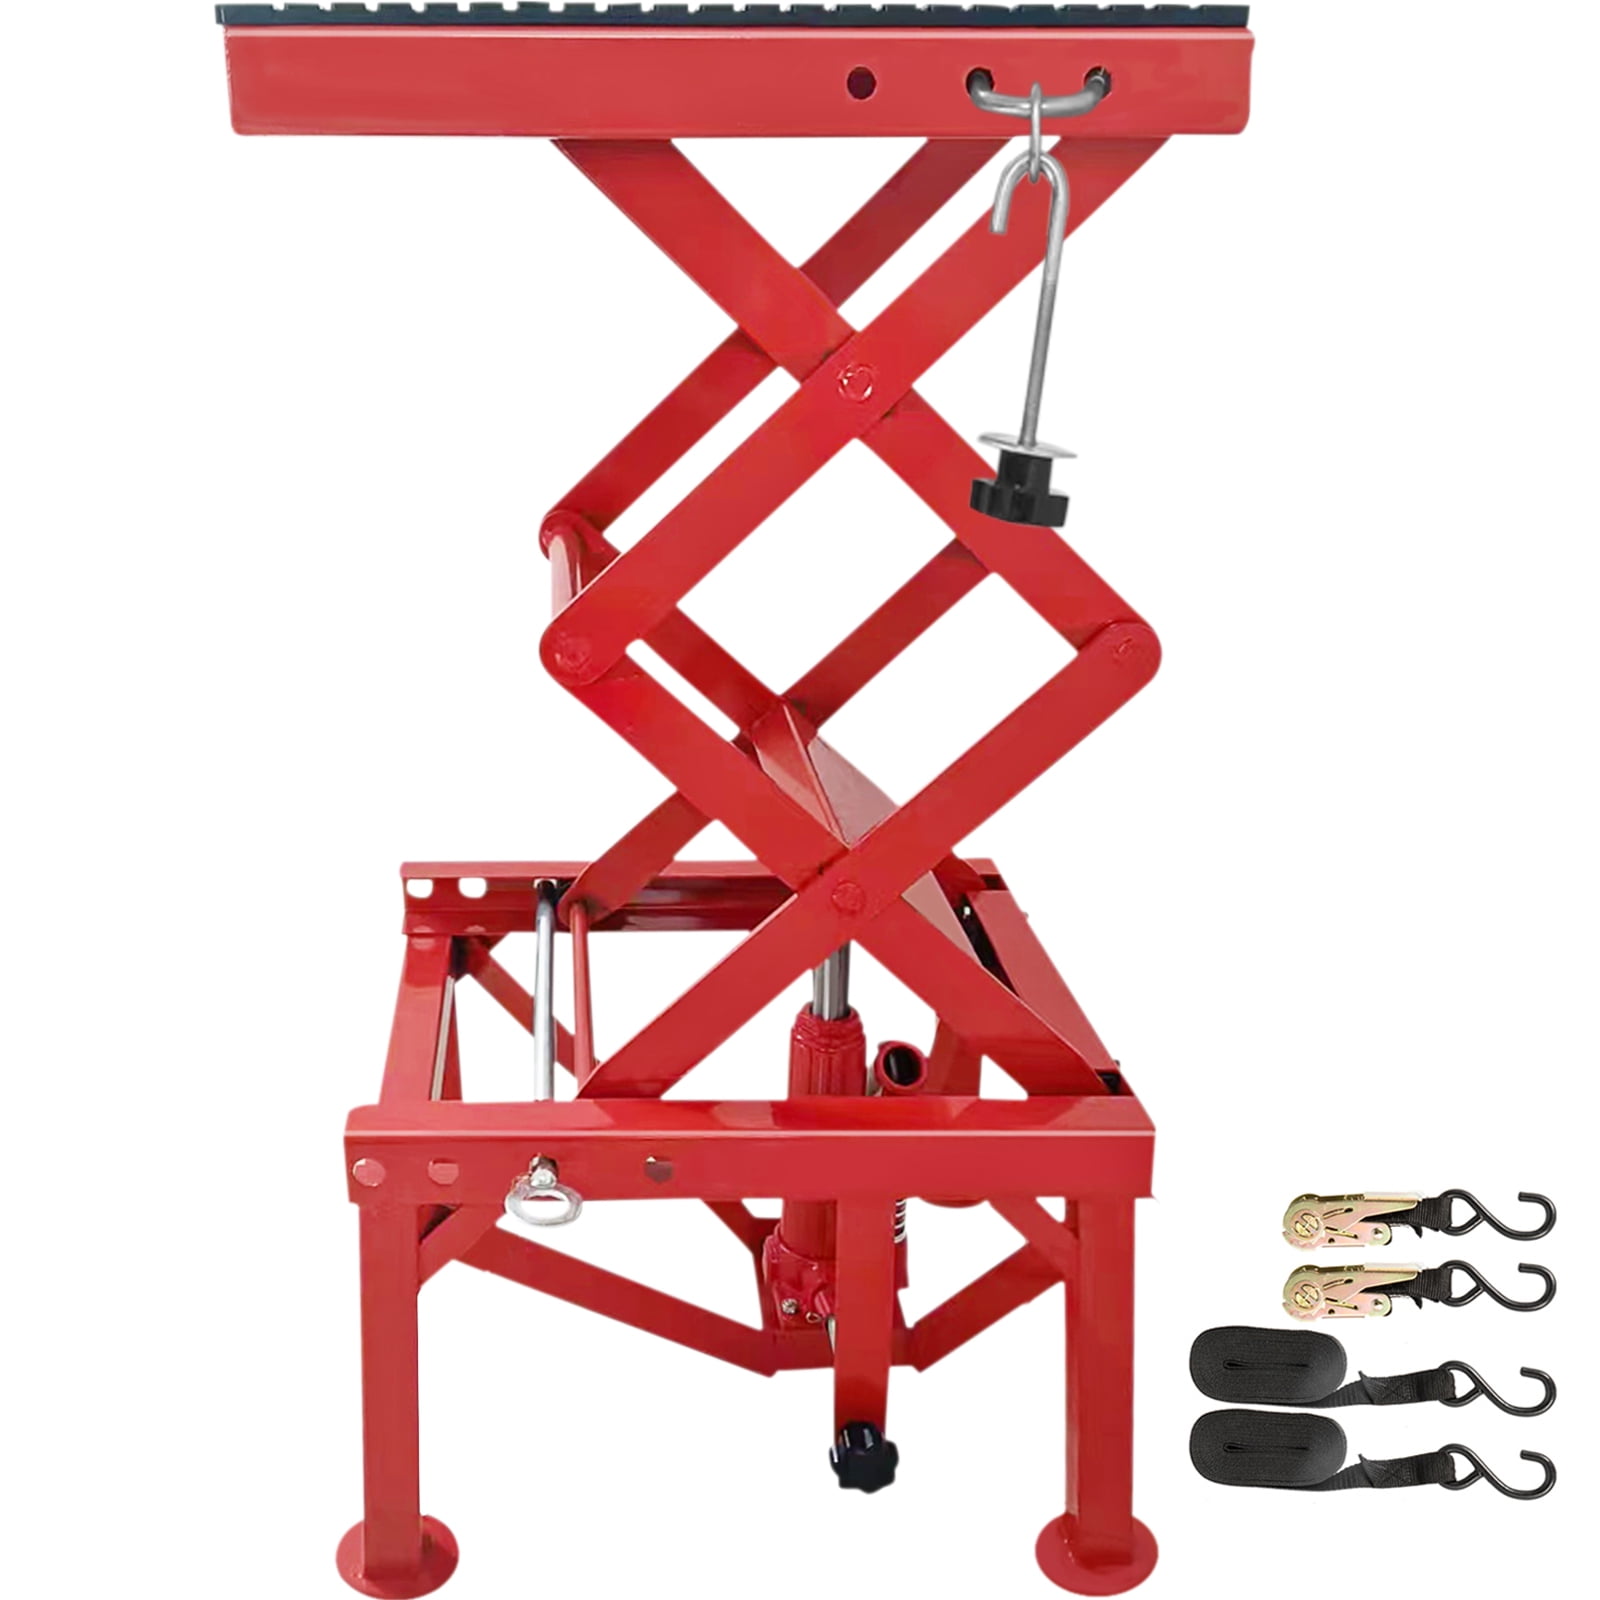 Motorcycle Scissor Lift Jack with Wide Deck Motorcycle Lift Table with Non-Skid Rubber Pad Compact Crank Hoist Stand,Motorcycle Scissor Jack Stand VEVOR Motorcycle Jack 1100lbs 